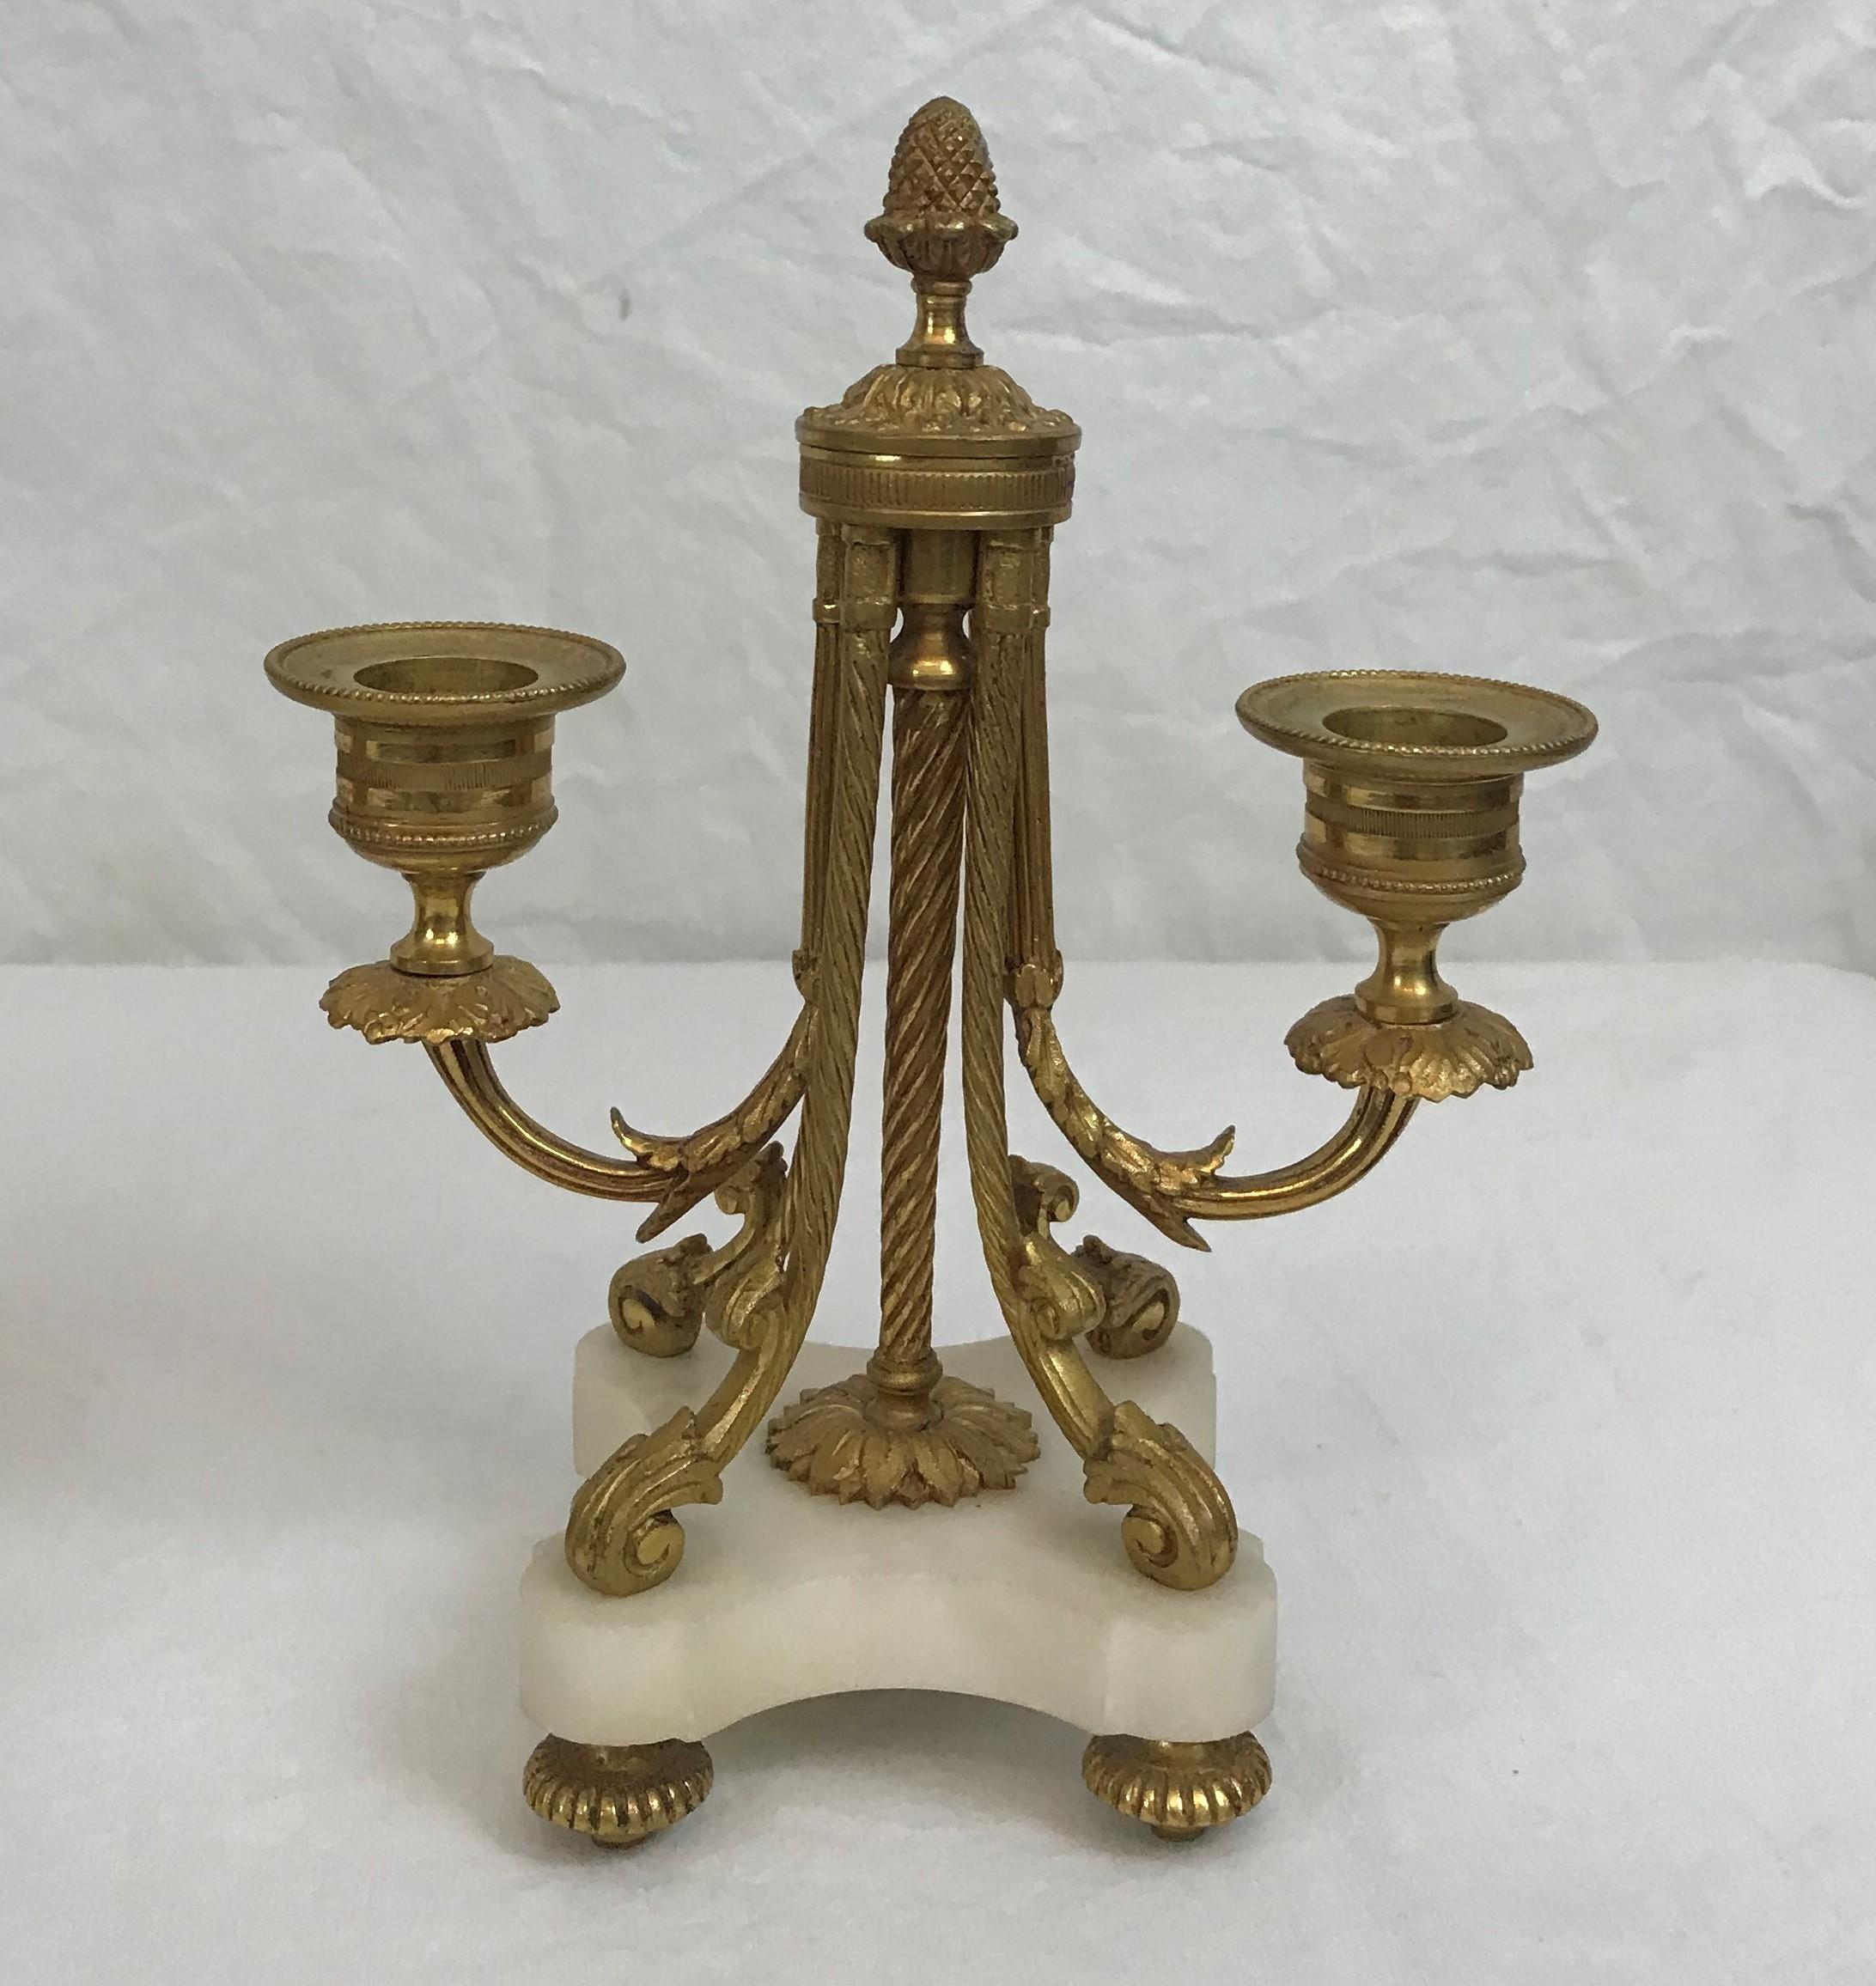 Vincenti et Cie Diminutive Clock Set, French Marble and Ormolu, circa 1890-1900 In Good Condition For Sale In Seattle, WA